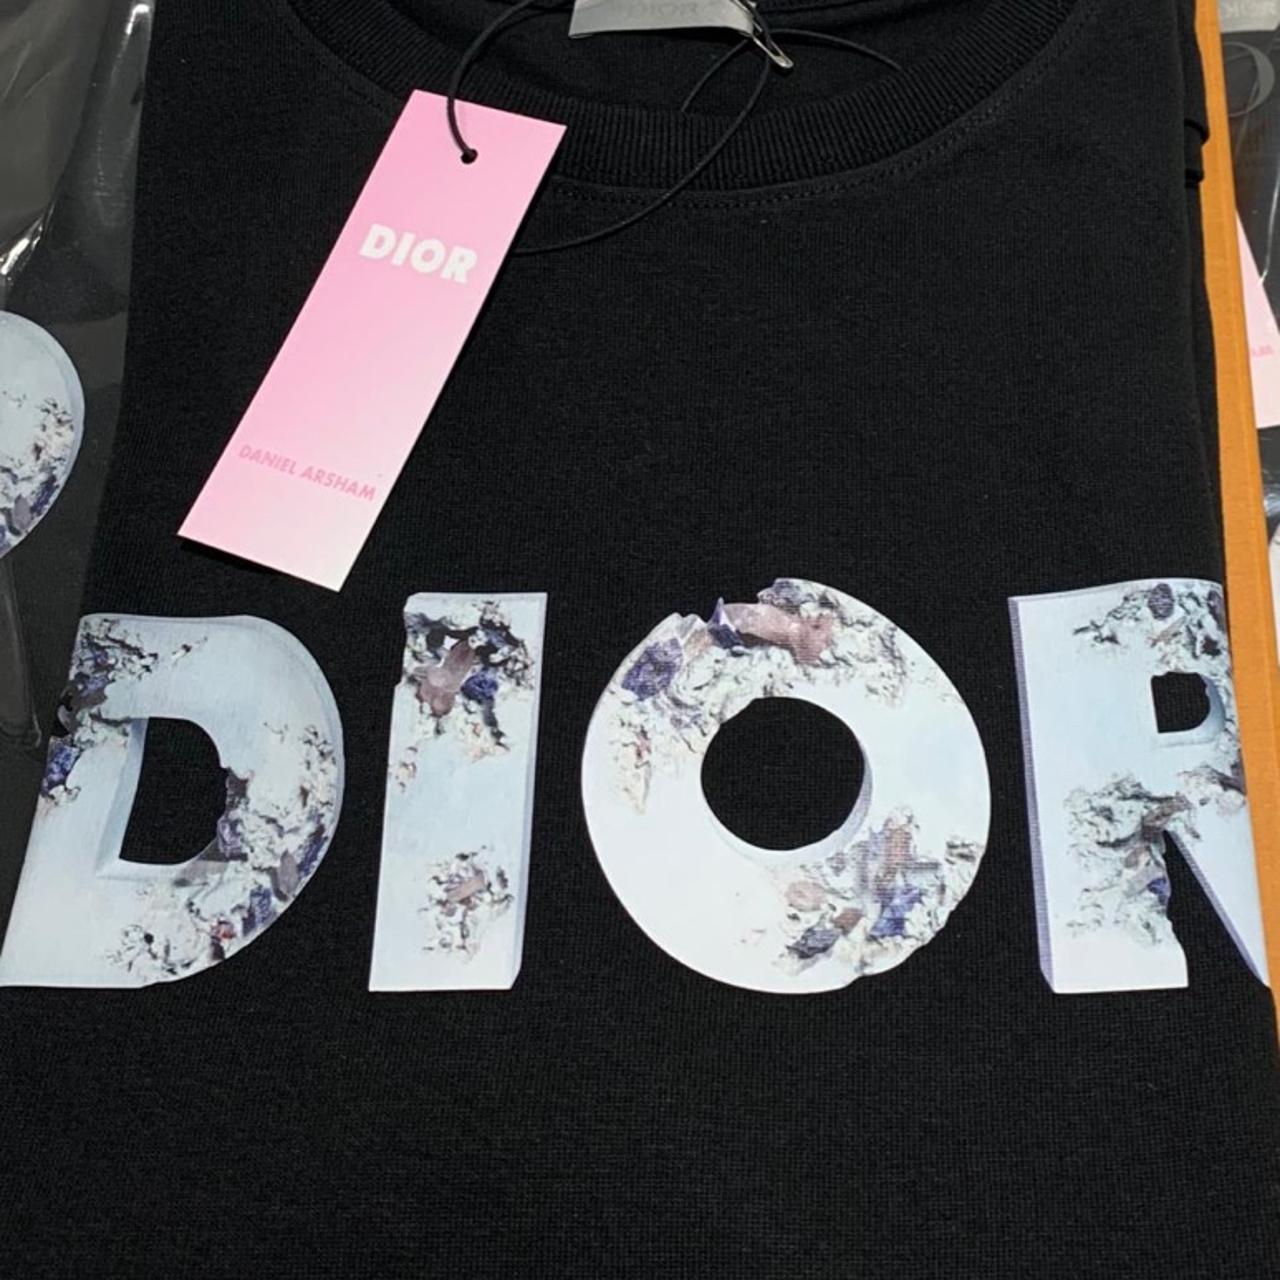 Dior Shirt  for Sale in Parma OH  OfferUp